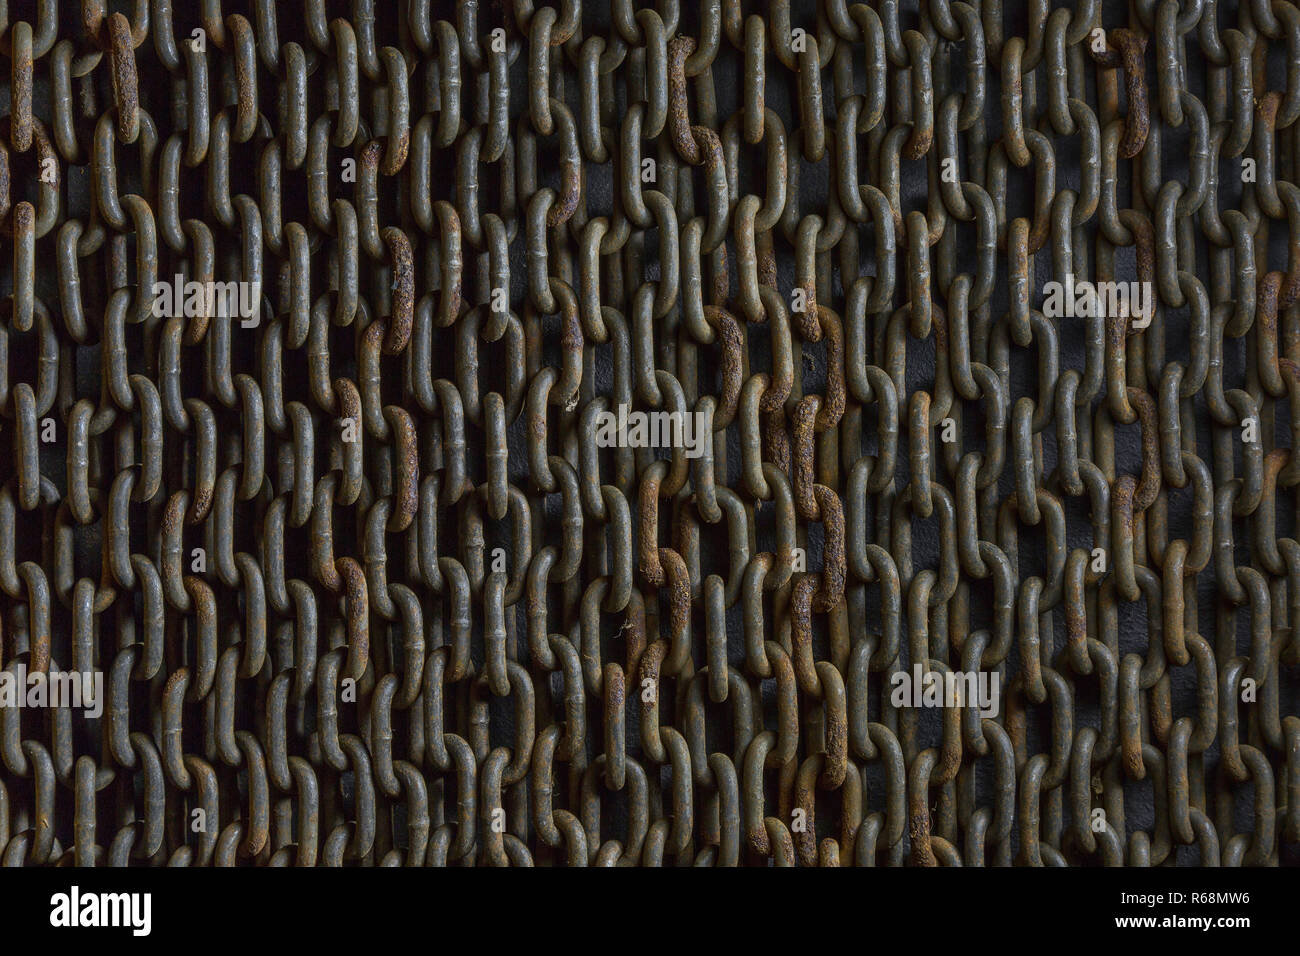 A background of rusty chain links Stock Photo